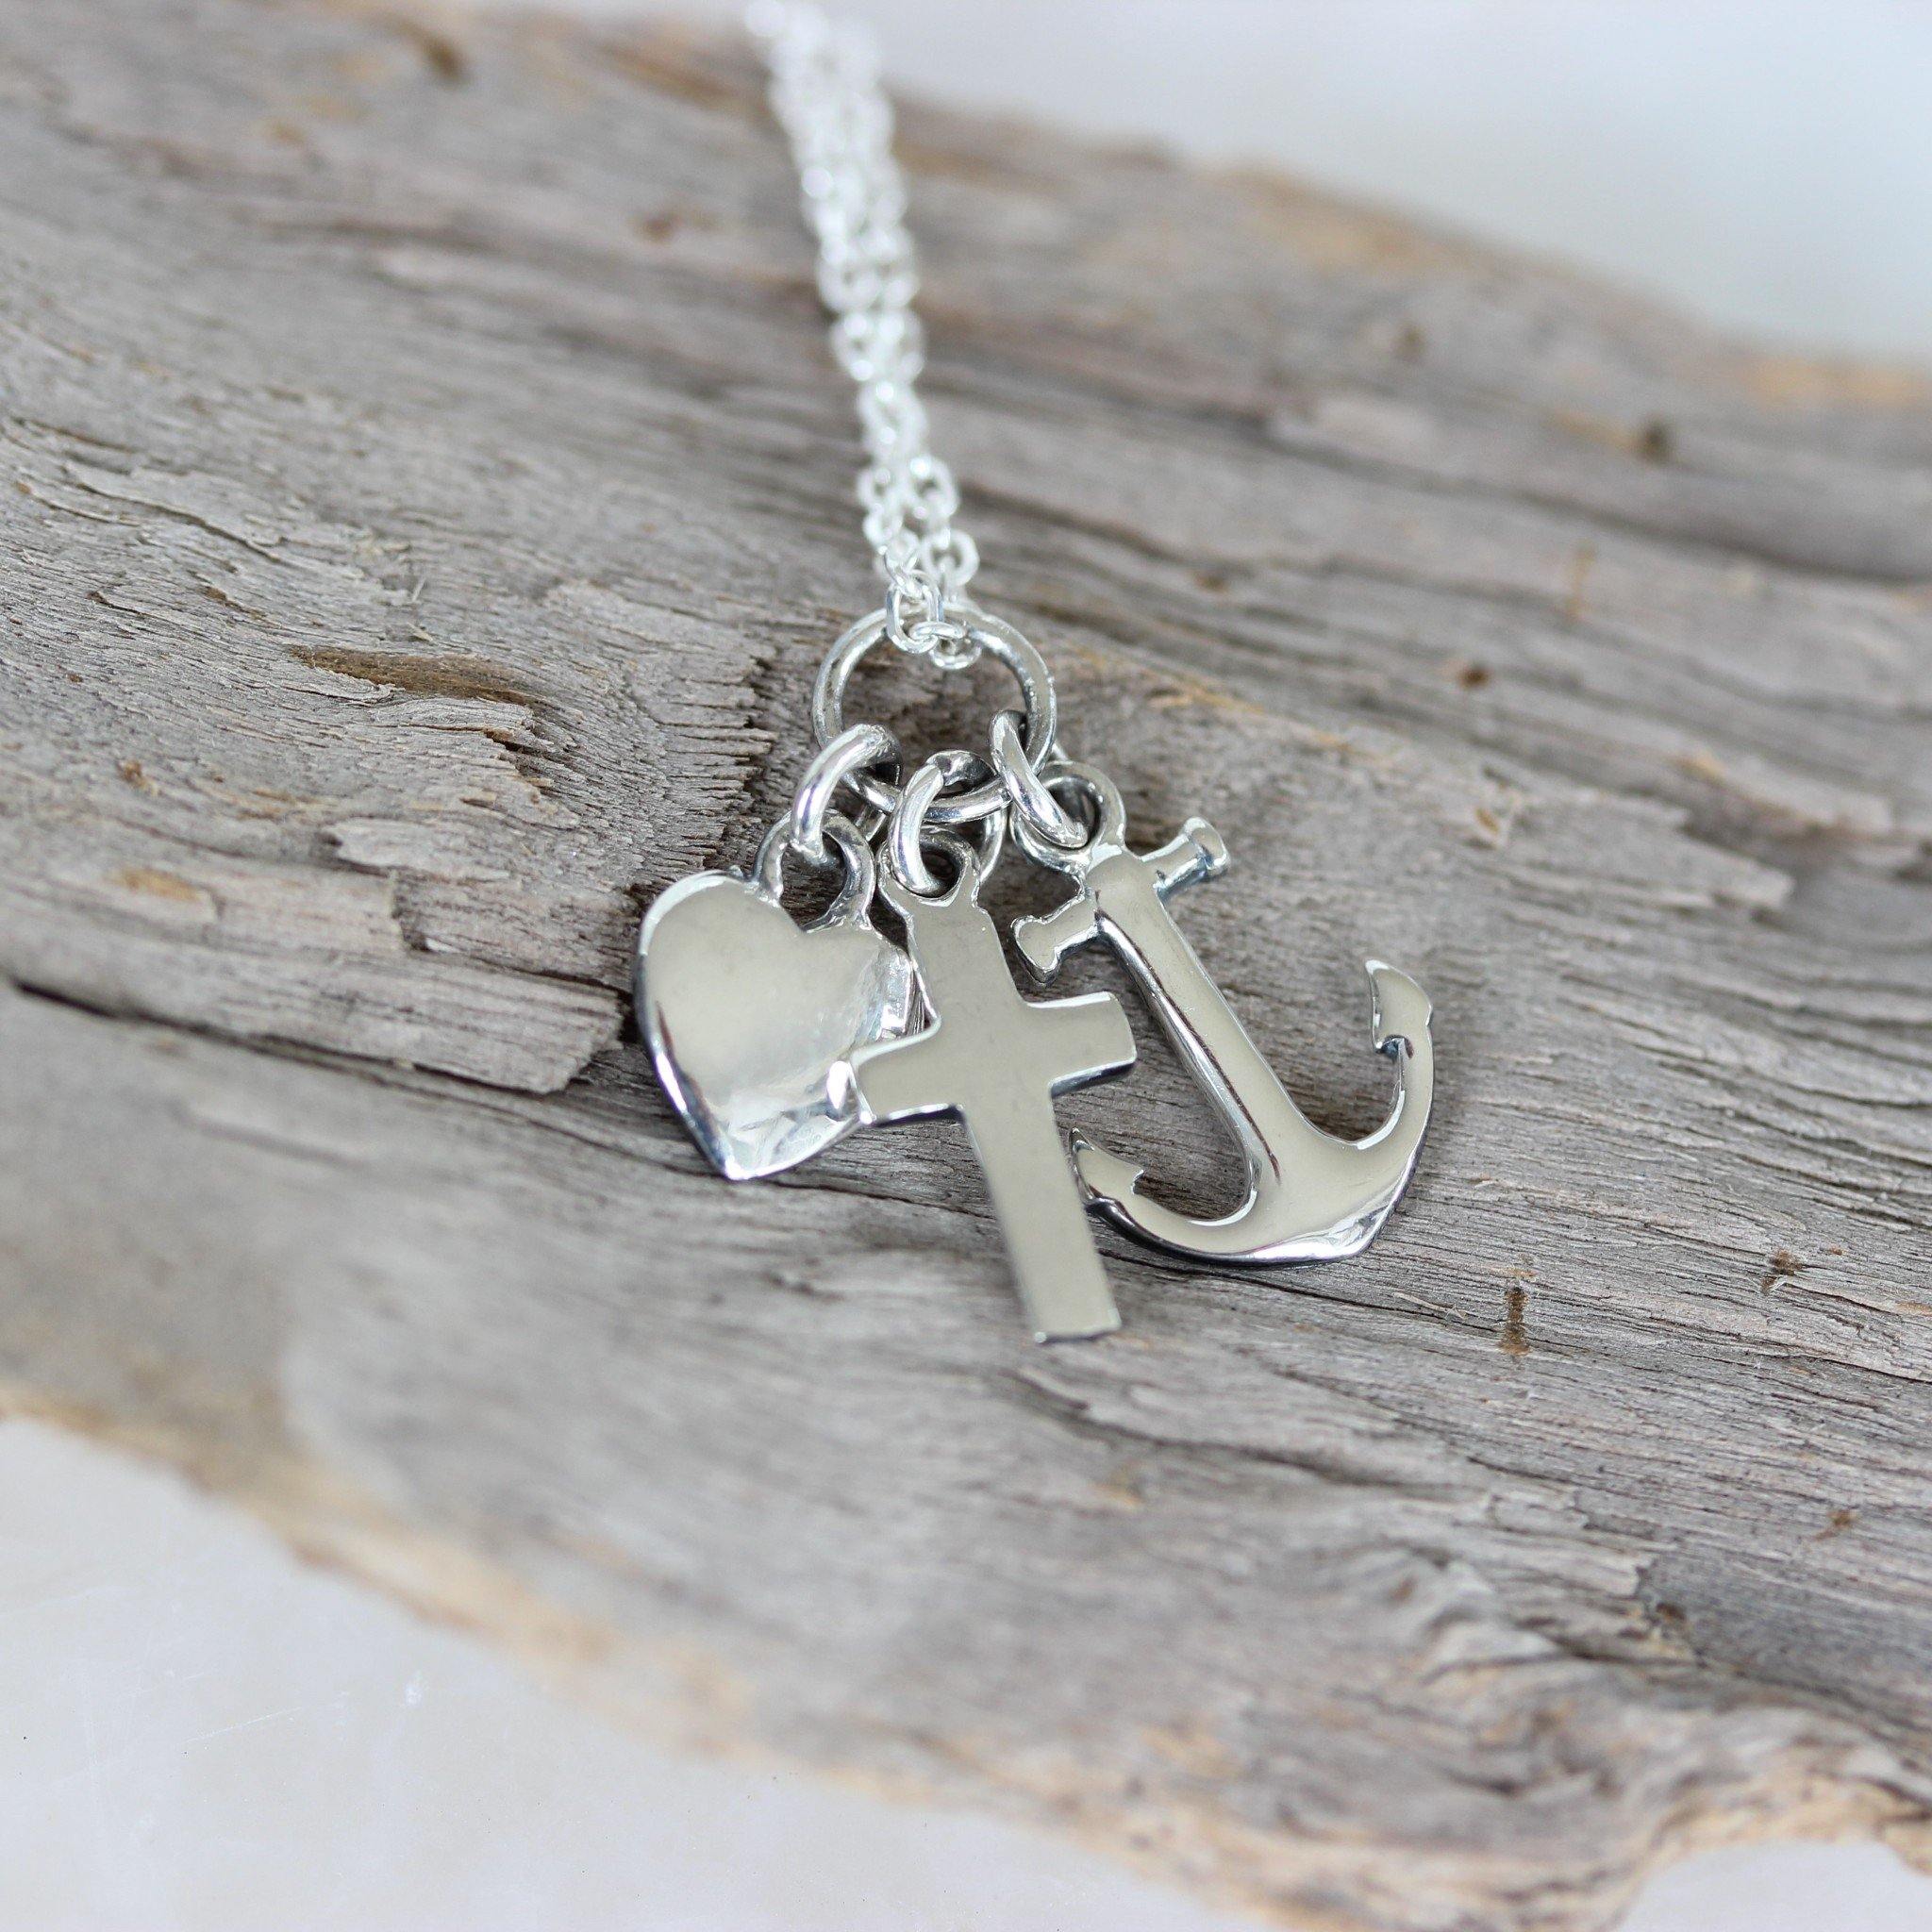 Sterling Silver Anchor, Cross & Heart Charm Dangle Pendant Necklace - STERLING SILVER DESIGNS